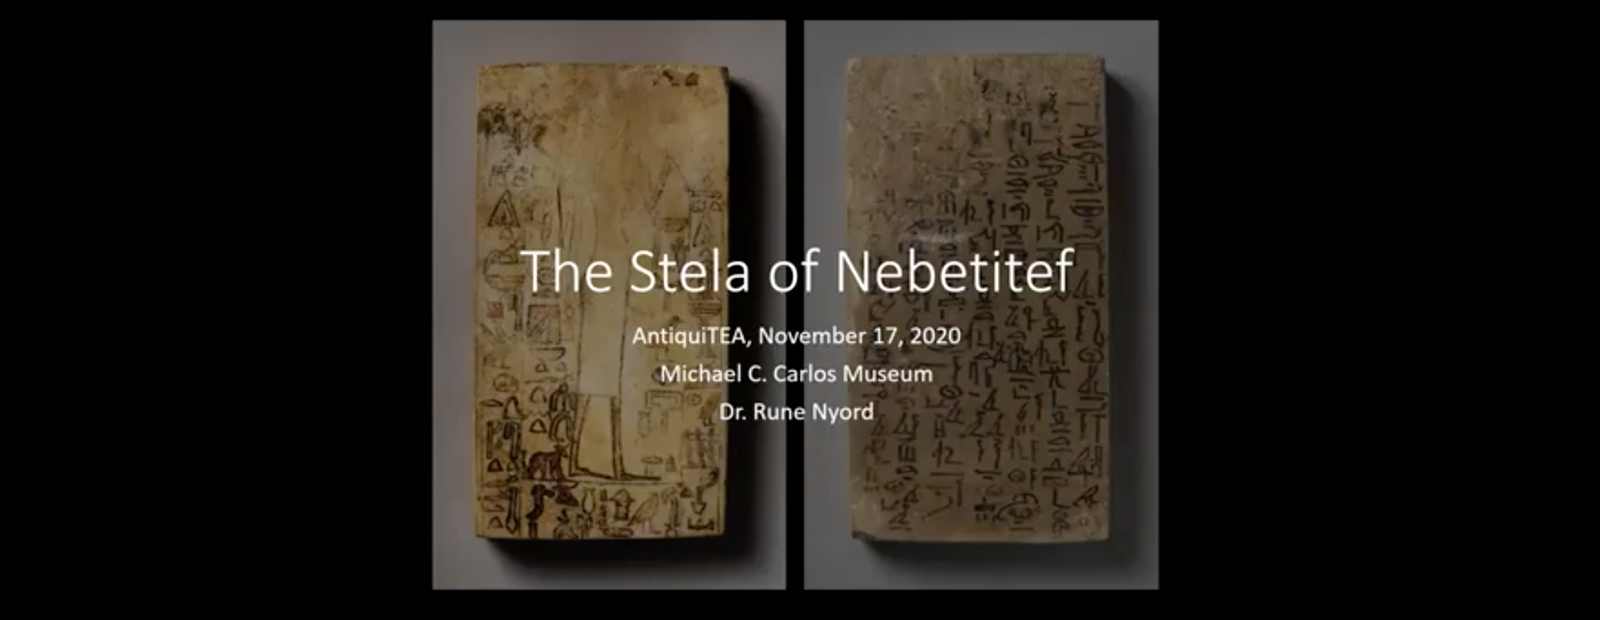 Two sides of the Stela of Nebetitef